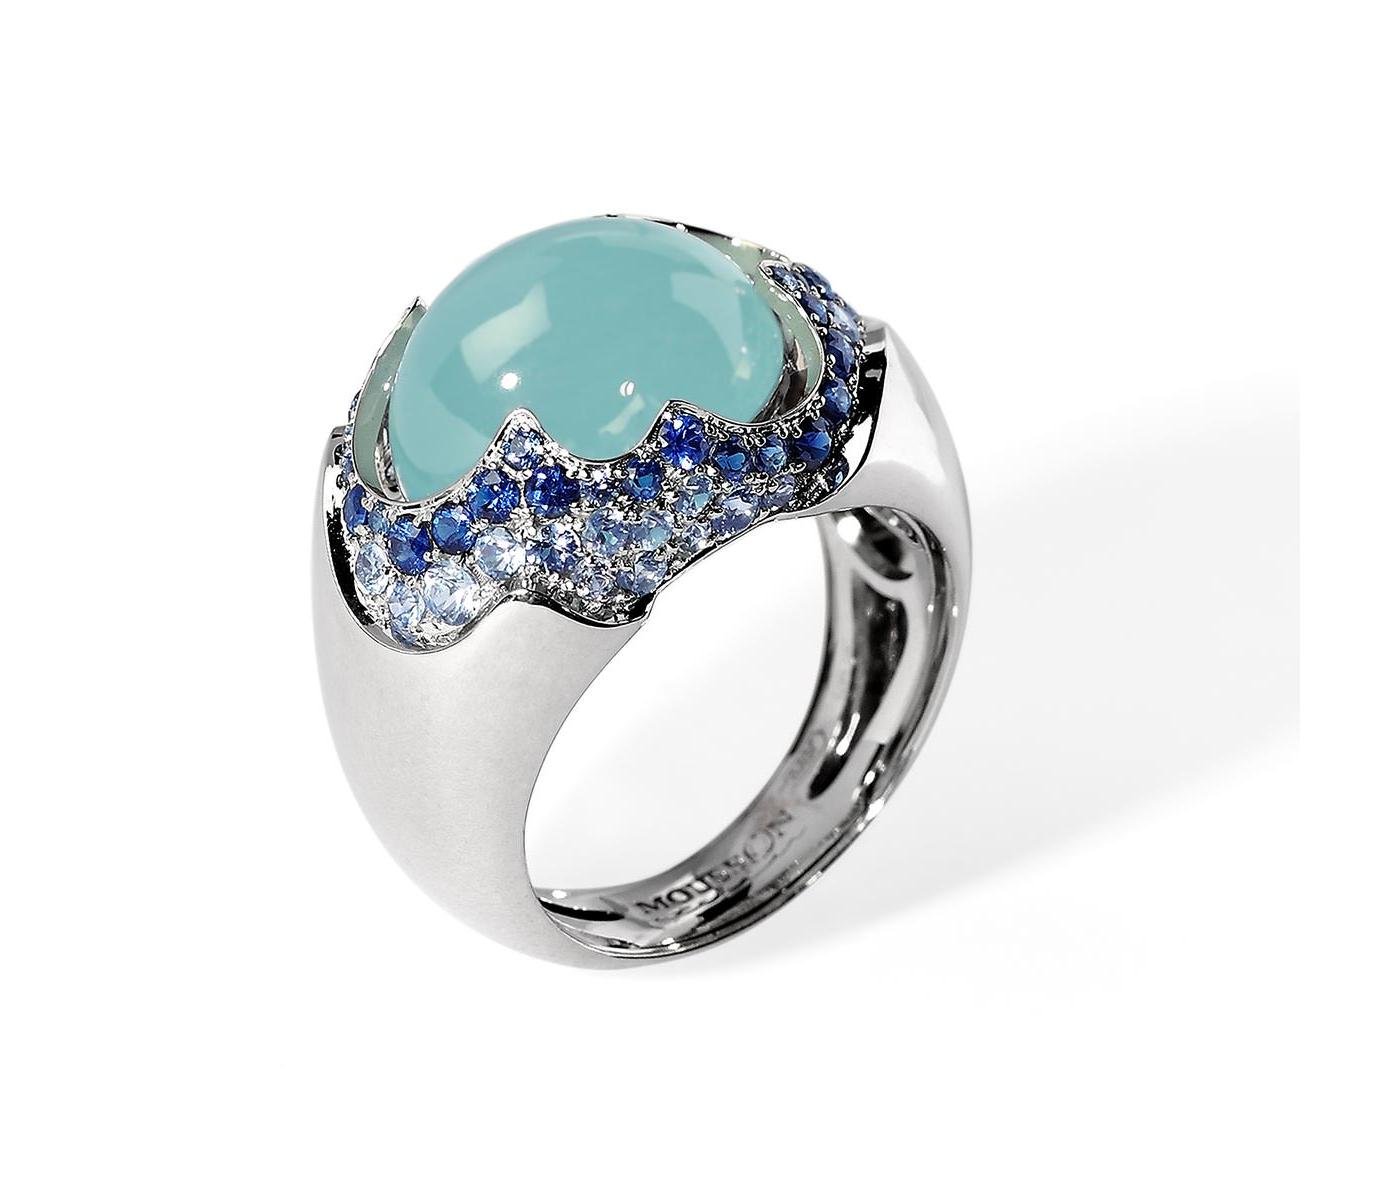 Ring by Mousson Atelier